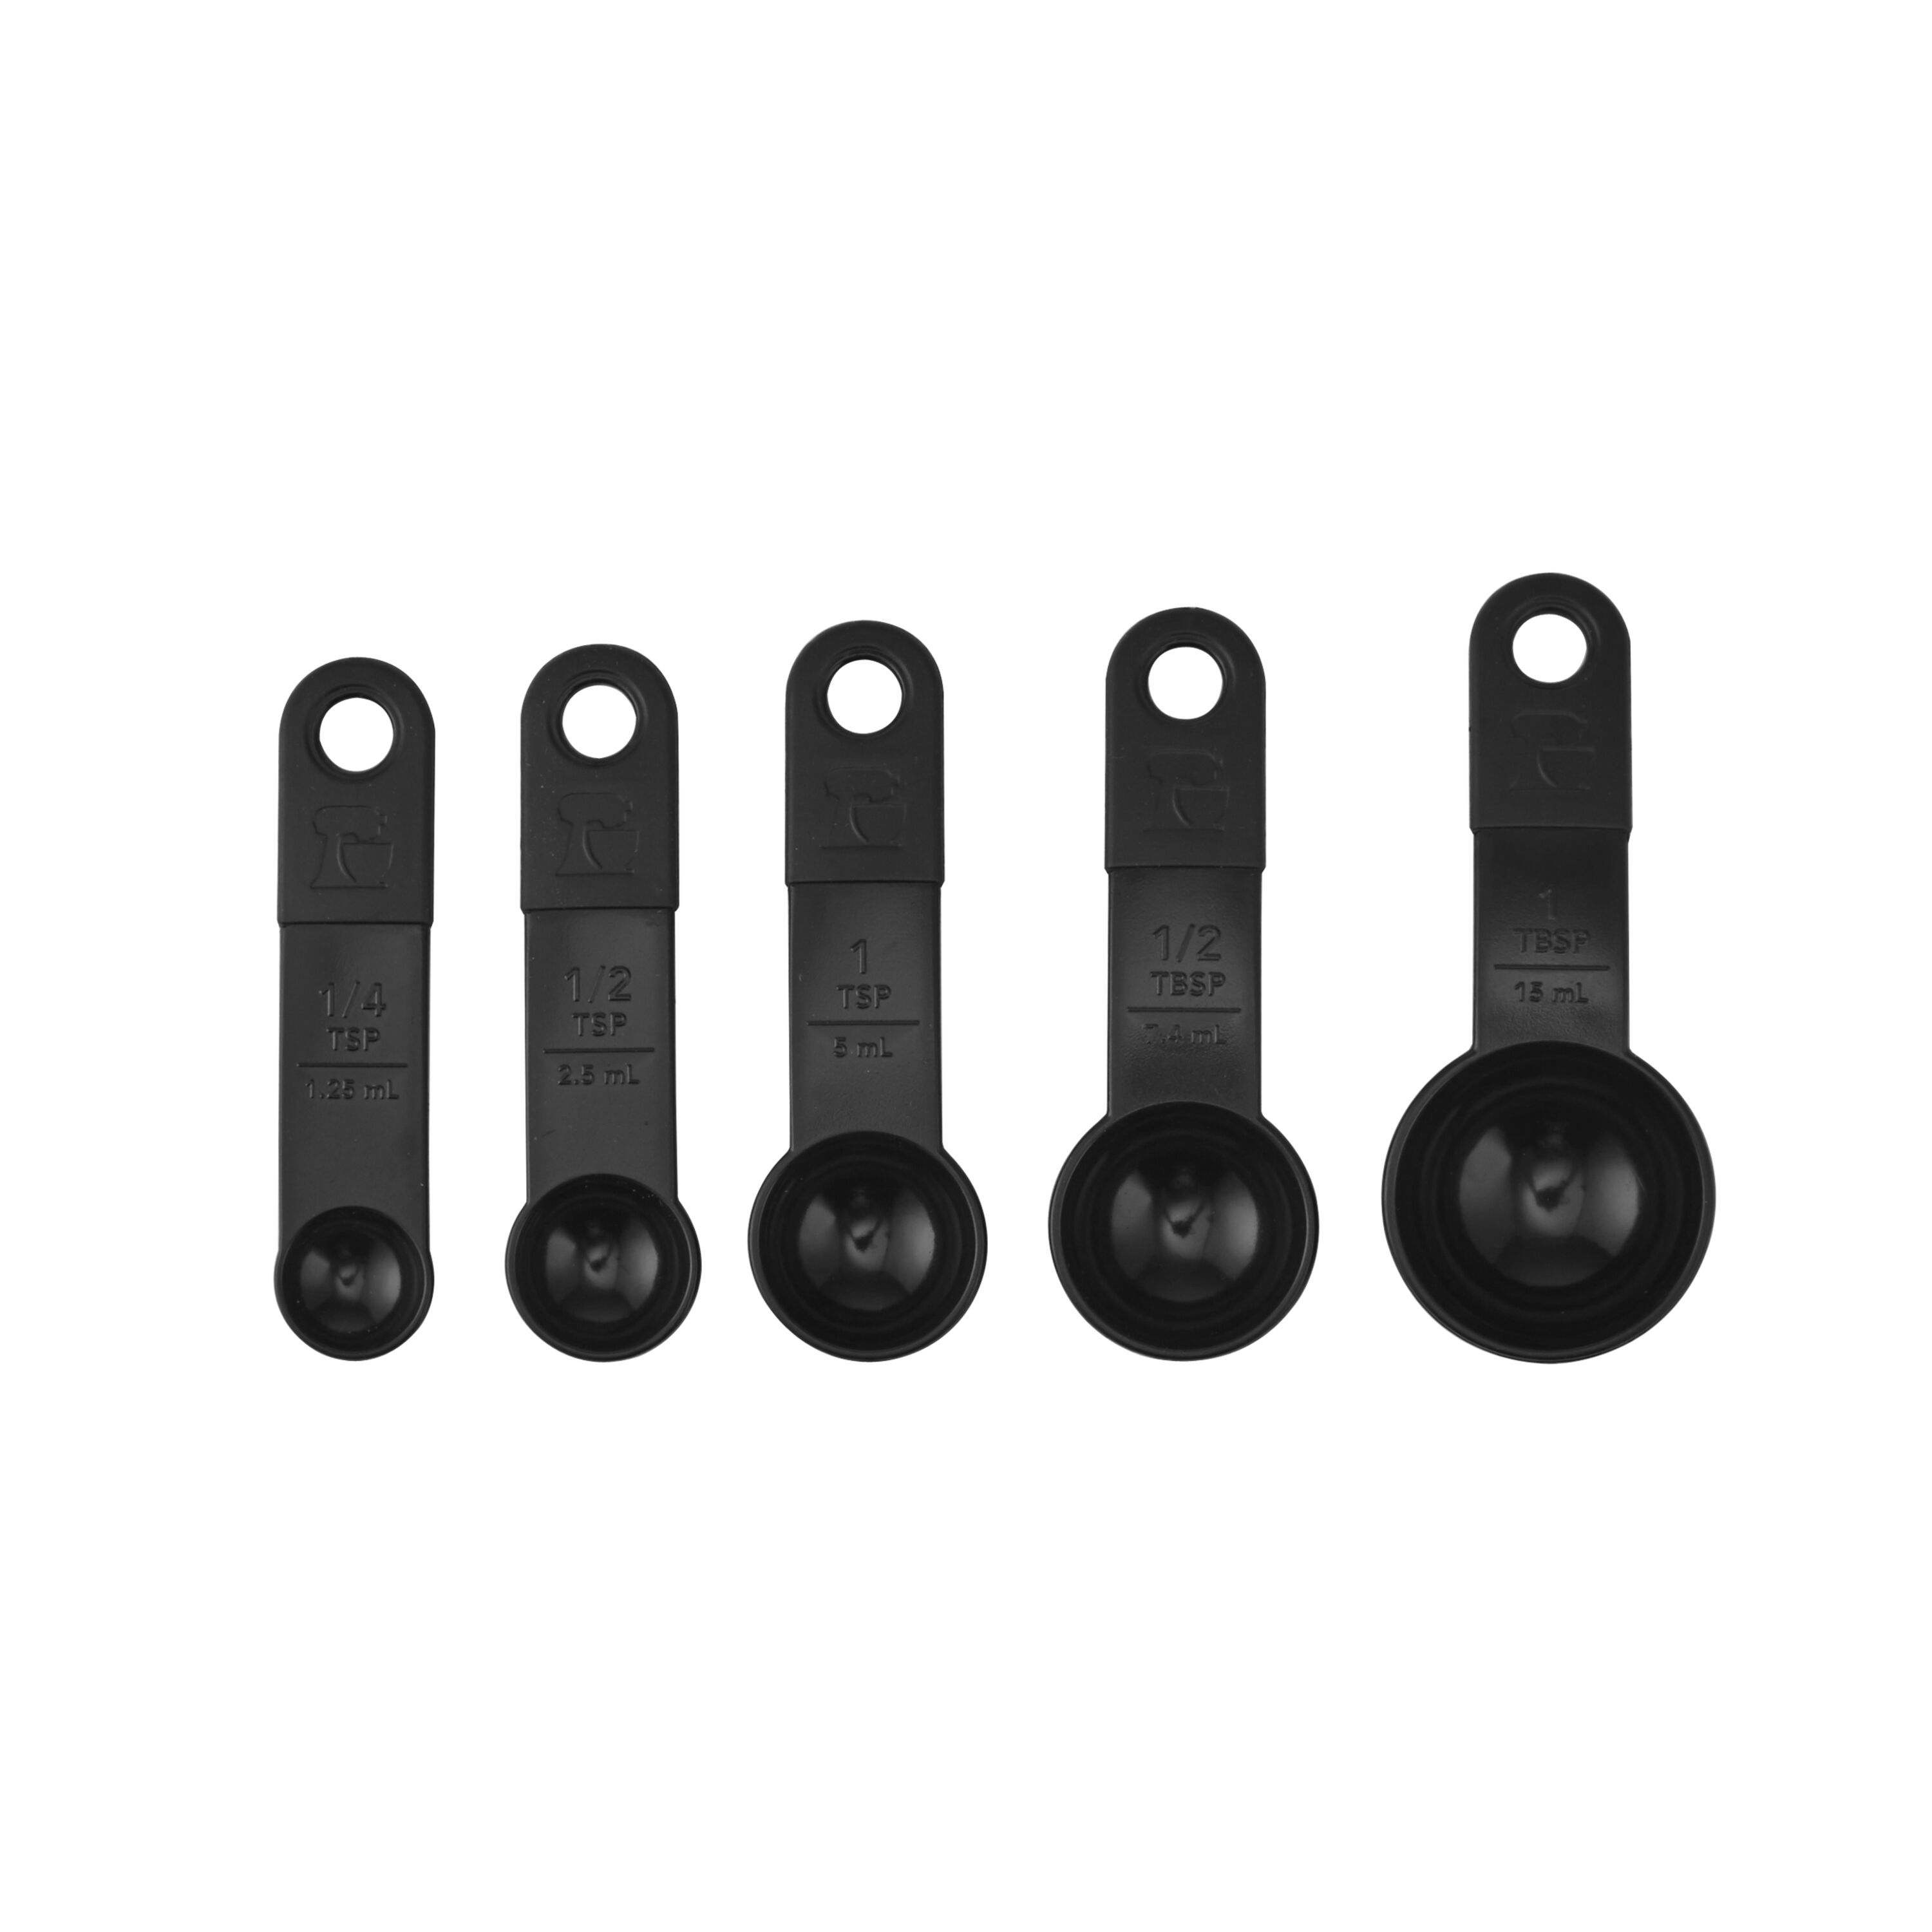 Kitchenaid 15-Piece Tool and Gadget Set in Black - image 5 of 18